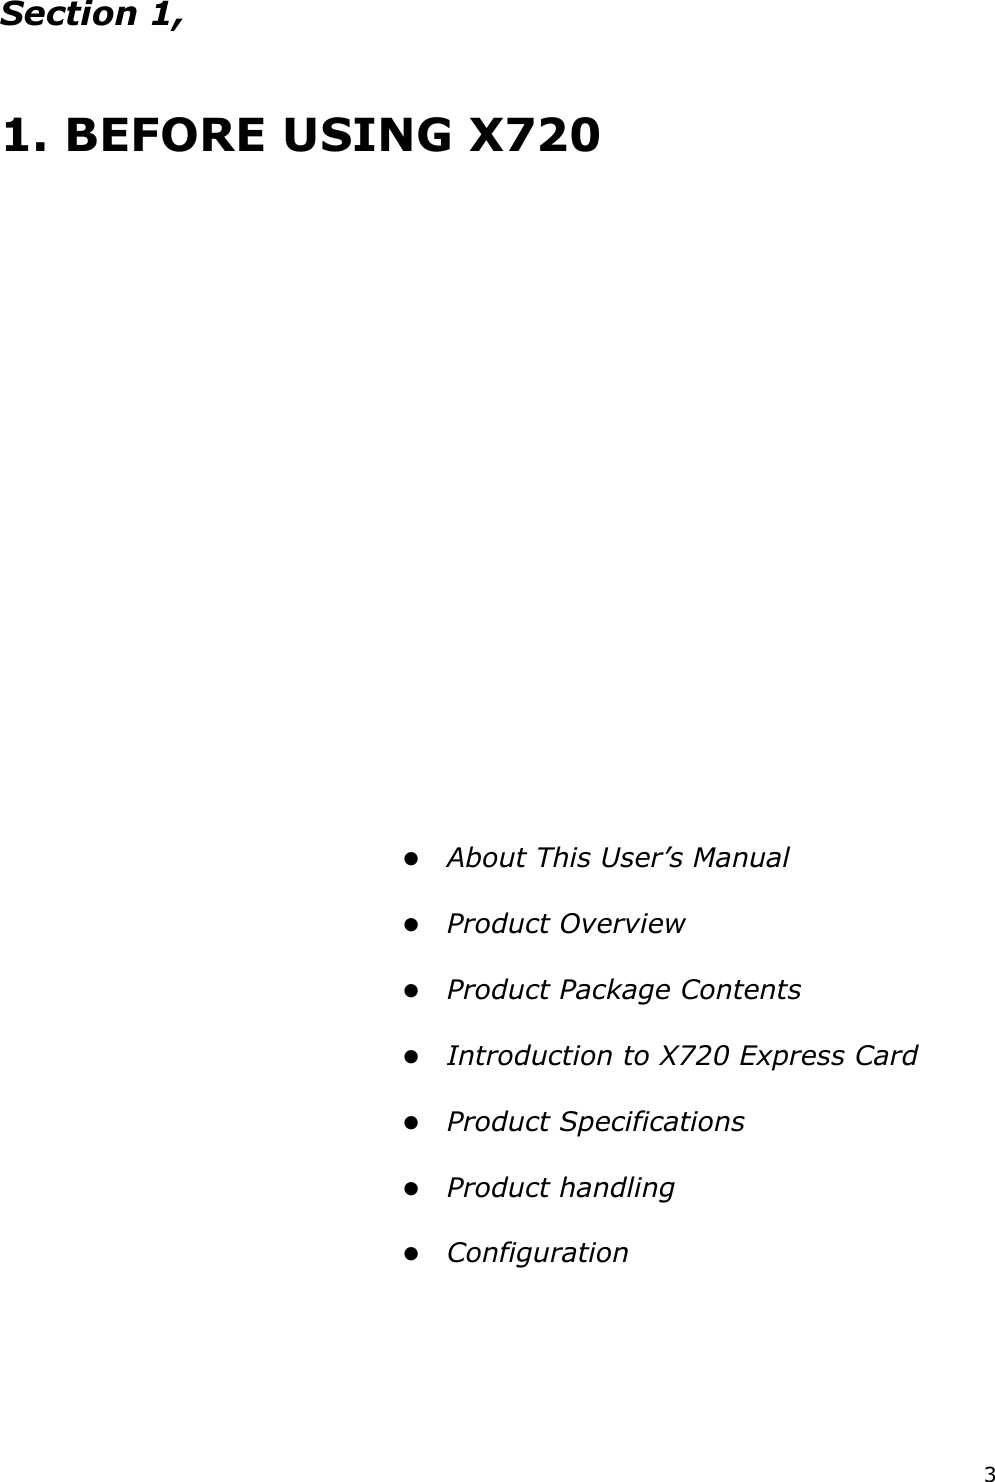 3   Section 1,           1. BEFORE USING X720                                                                                      About This User’s Manual     Product Overview     Product Package Contents     Introduction to X720 Express Card     Product Specifications     Product handling     Configuration            